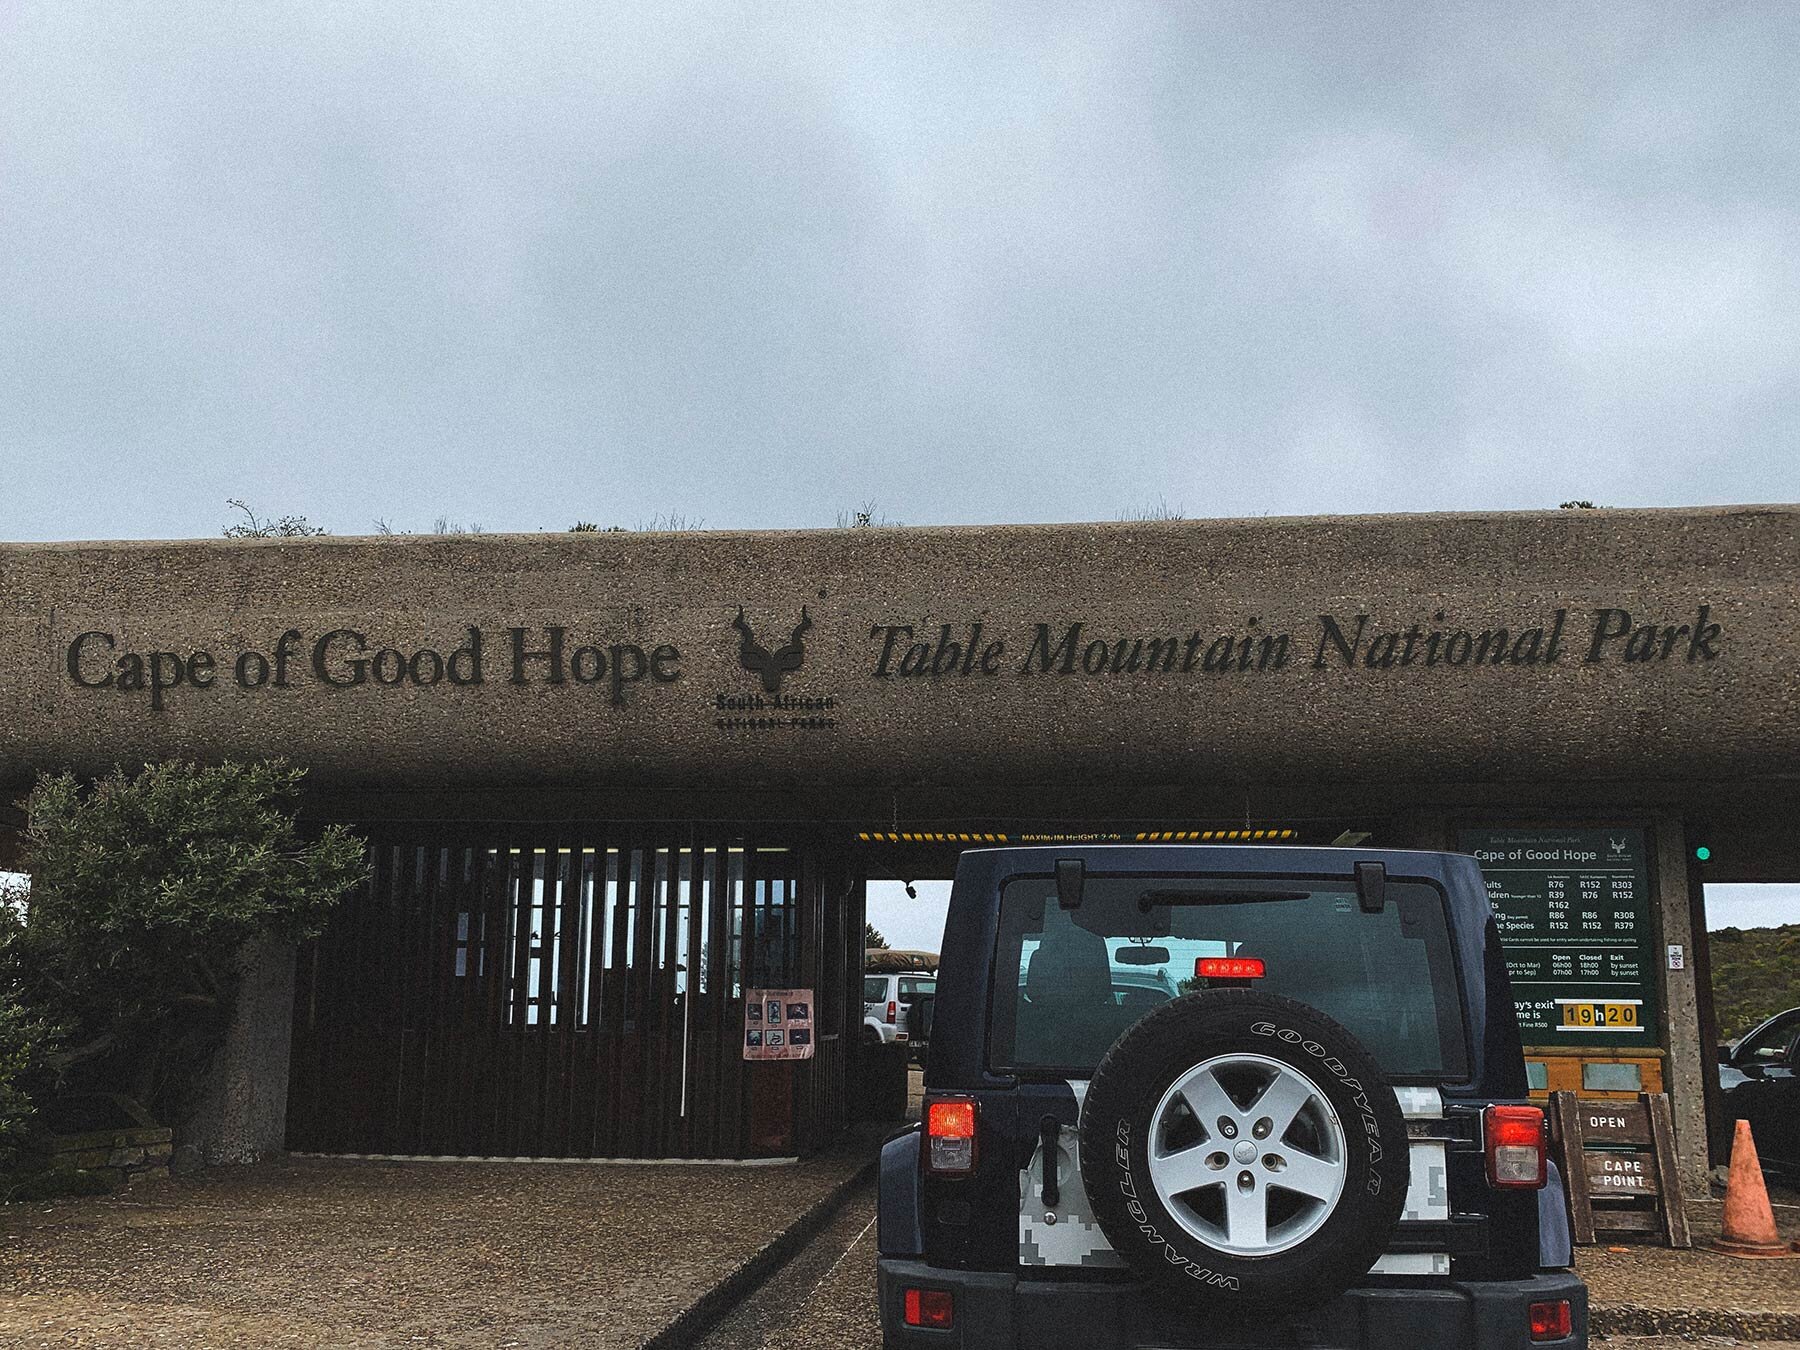 Cape_of-Good_Hope_Table-Mountain_Entry-Sign.jpg